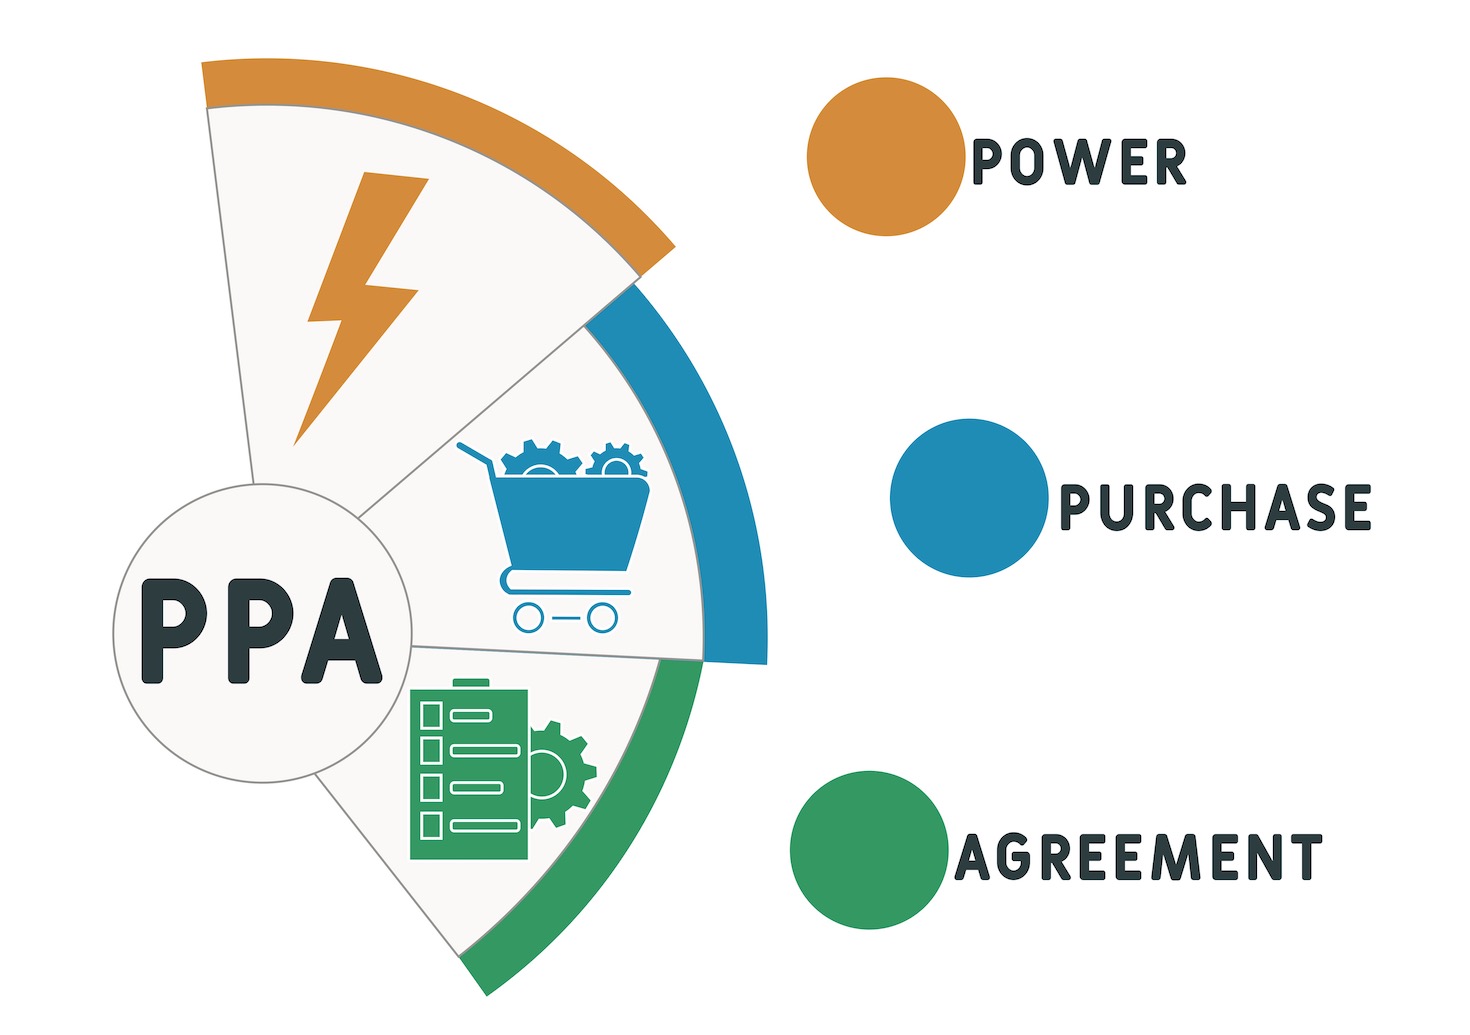 150-gw-later:-the-dizzying-rise-of-the-power-purchase-agreement-|-greenbiz